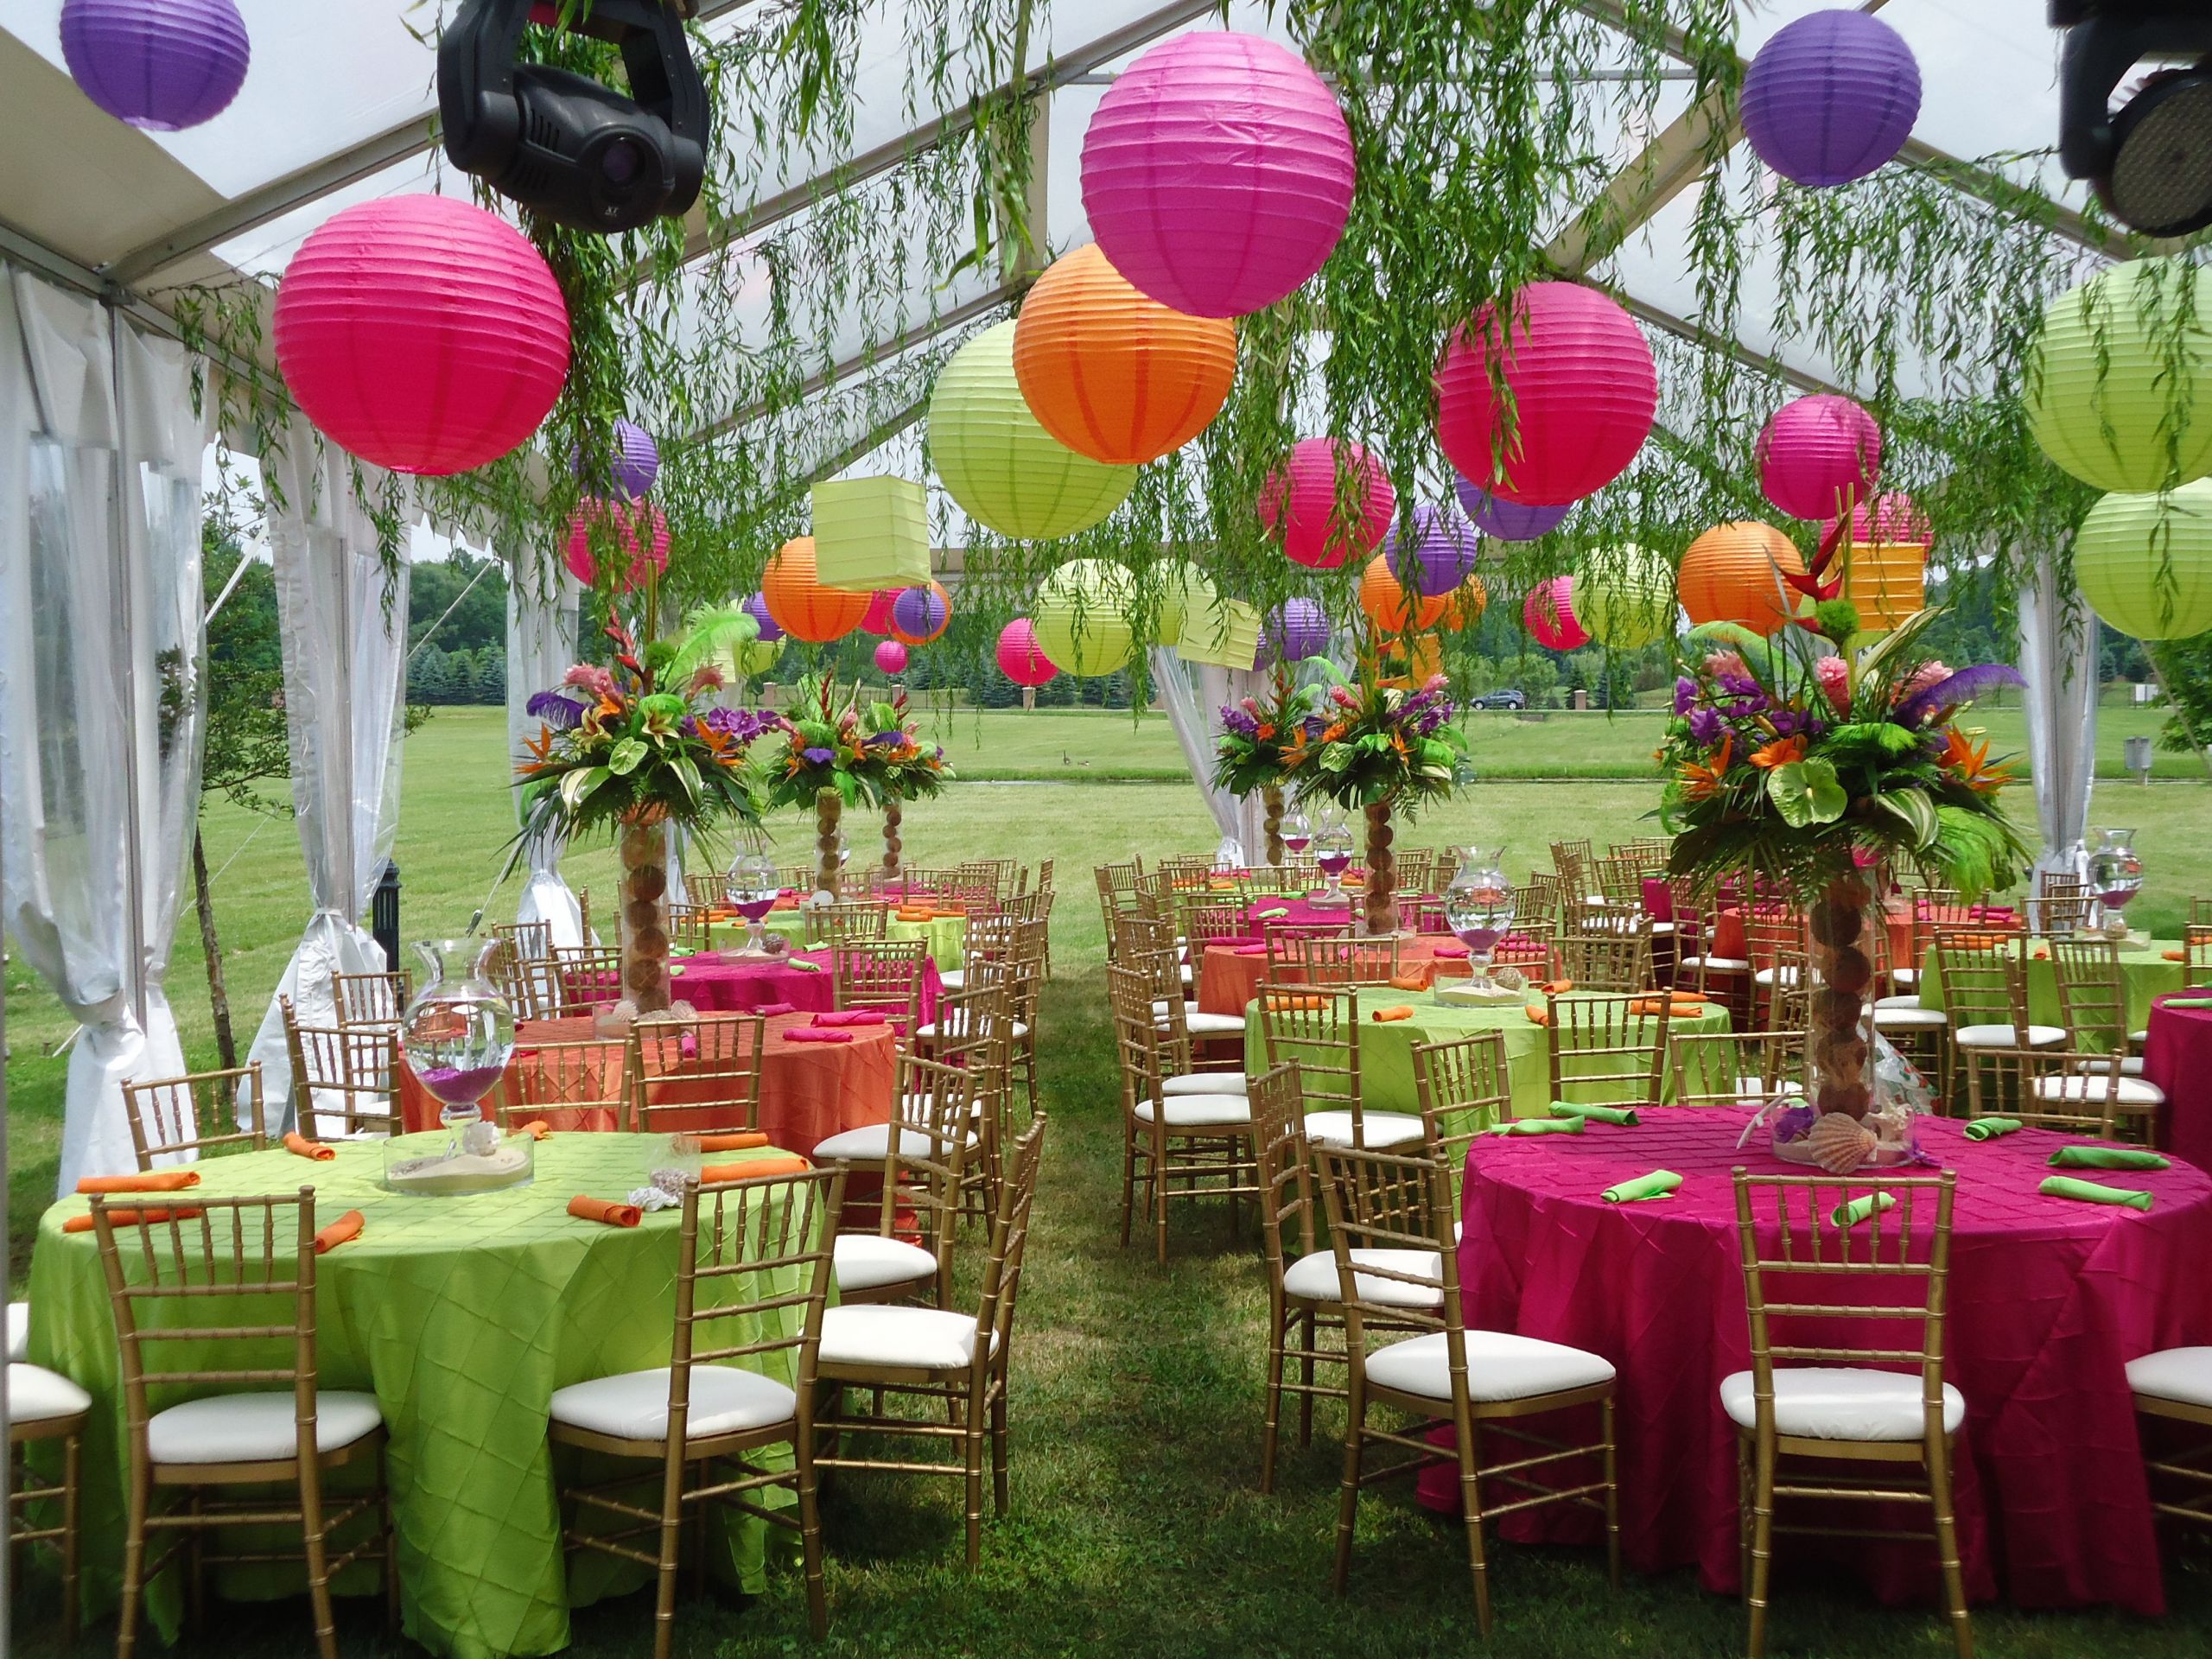 Graduation Party Location Ideas
 A catered graduation with food stations florist A Floral